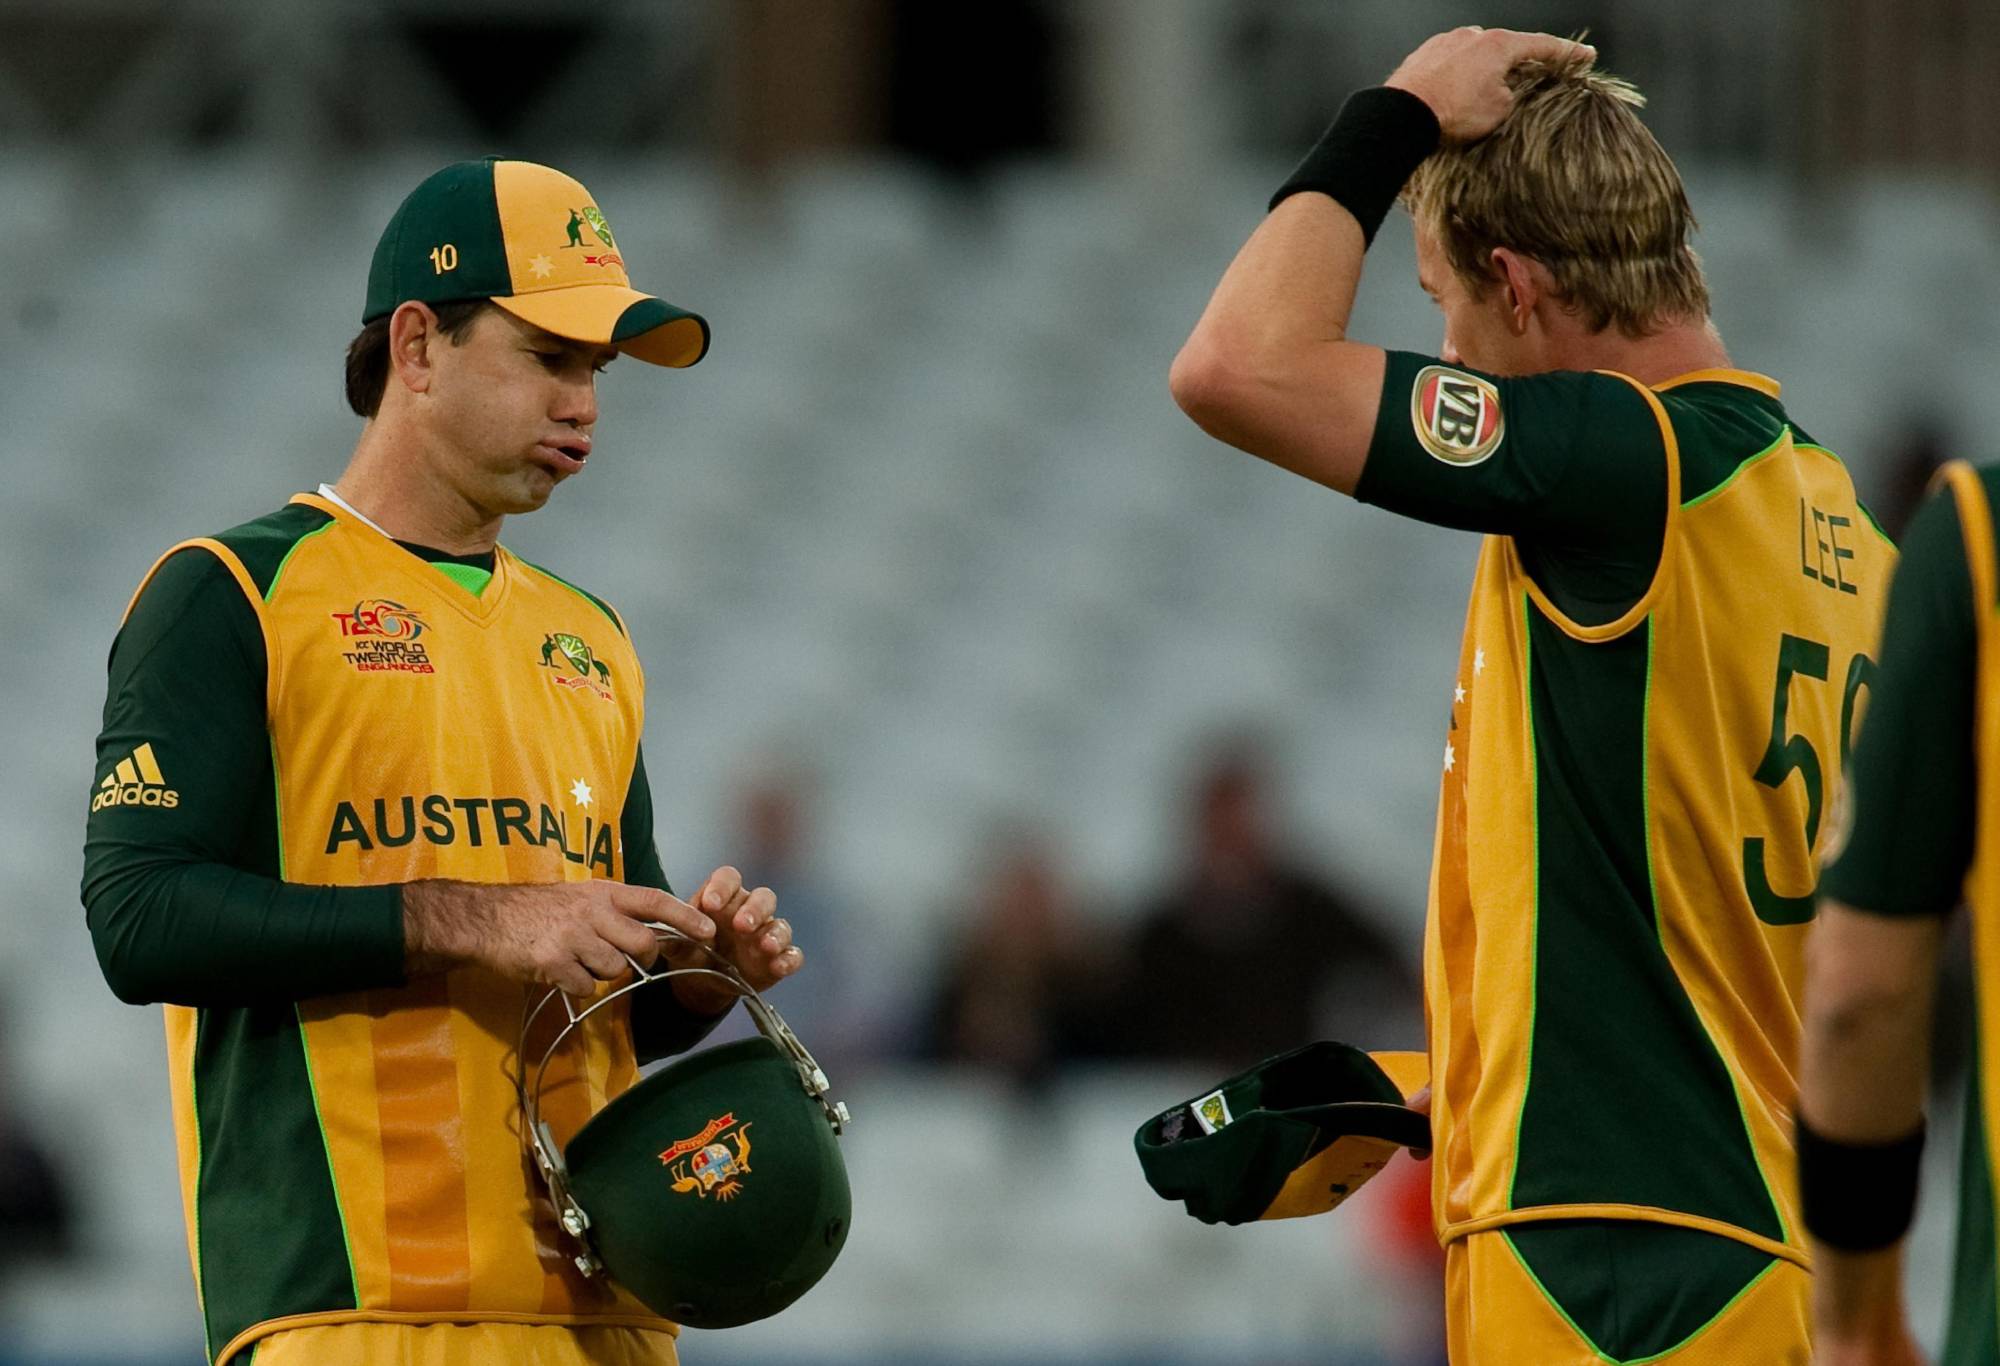 Australia's Brett Lee with captain Ricky Ponting following the ICC World Twenty20 match at Trent Bridge, Nottingham. (Photo by Gareth Copley - PA Images/PA Images via Getty Images)